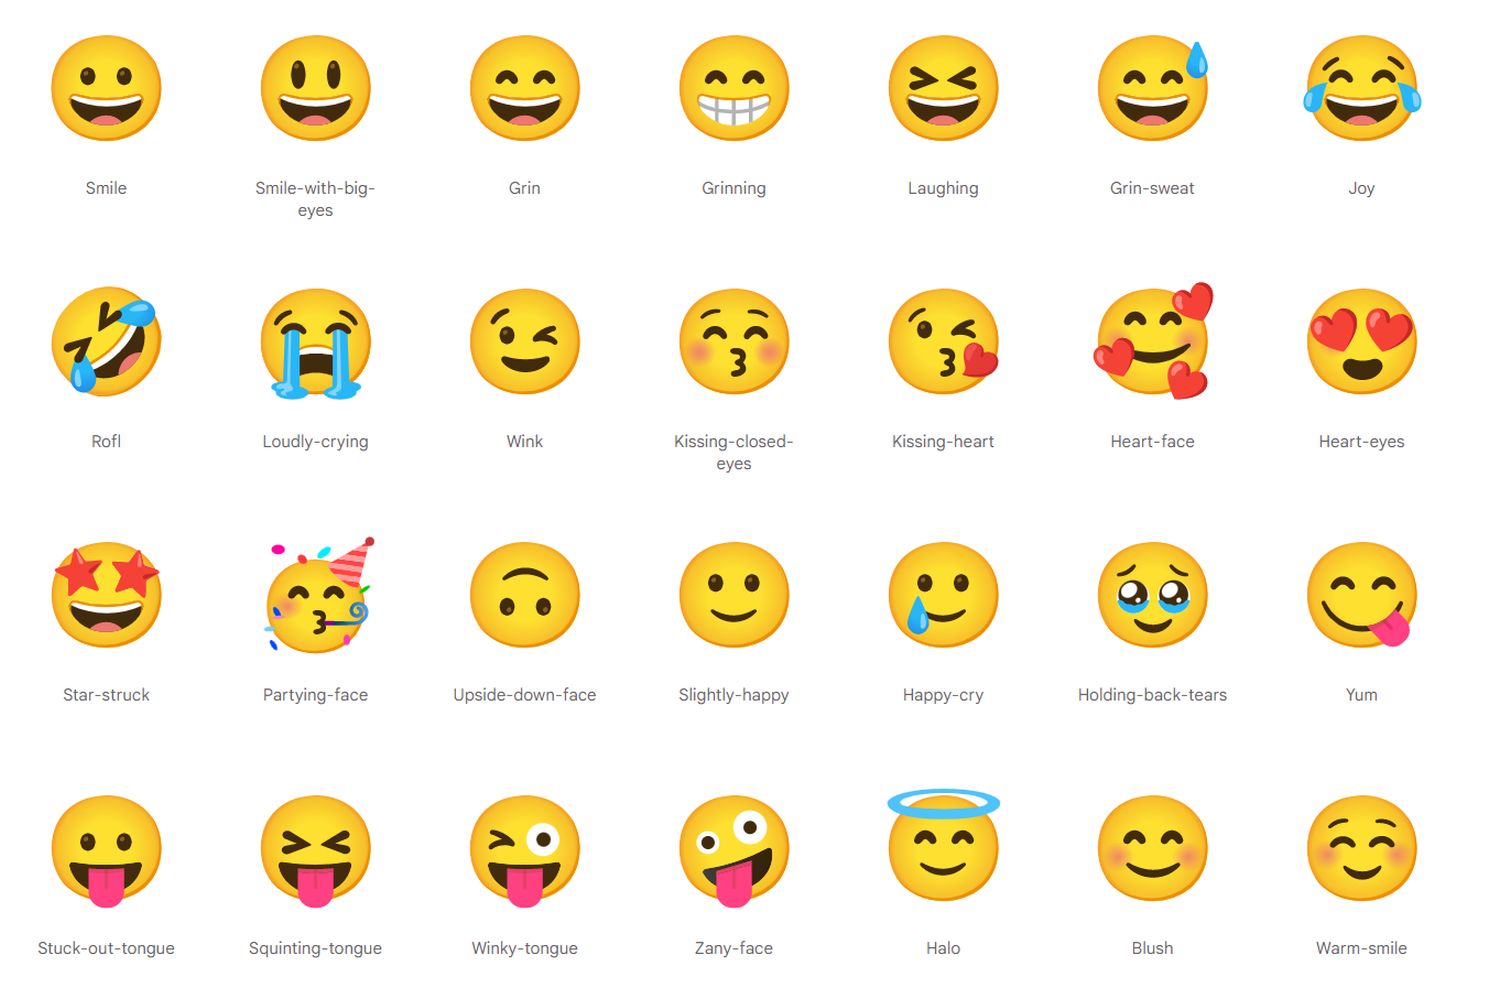 Animated emojis: Here you can see Google's new animated emojis and download  them individually for free